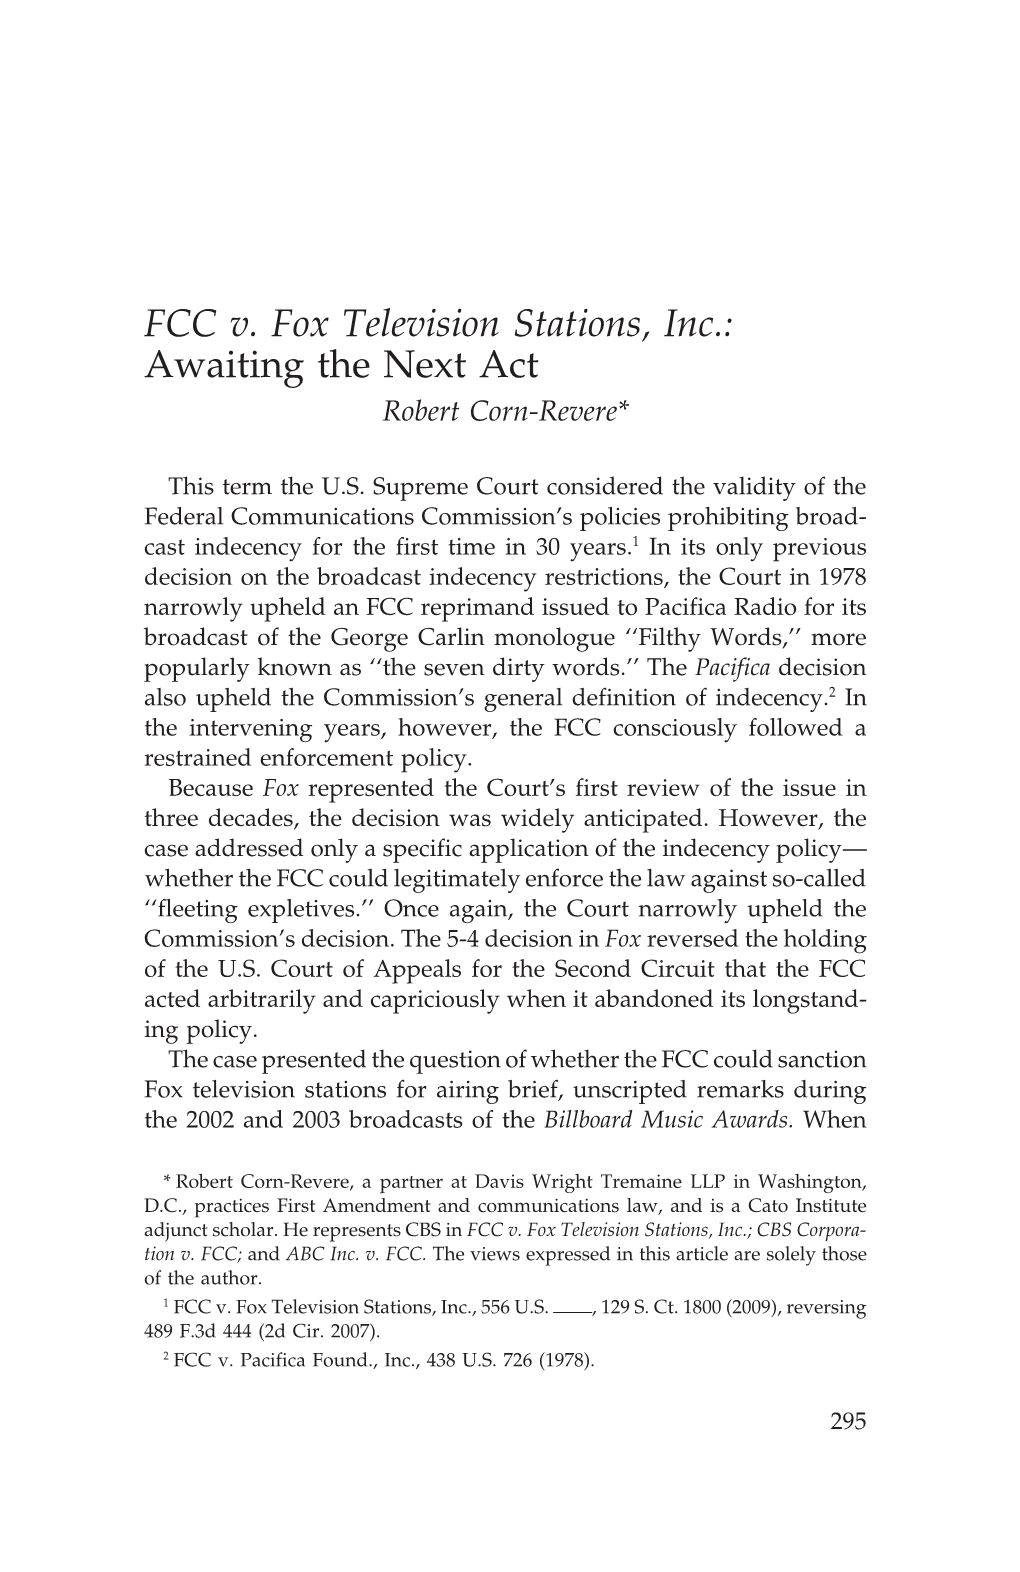 FCC V. Fox Television Stations, Inc.: Awaiting the Next Act Robert Corn-Revere*